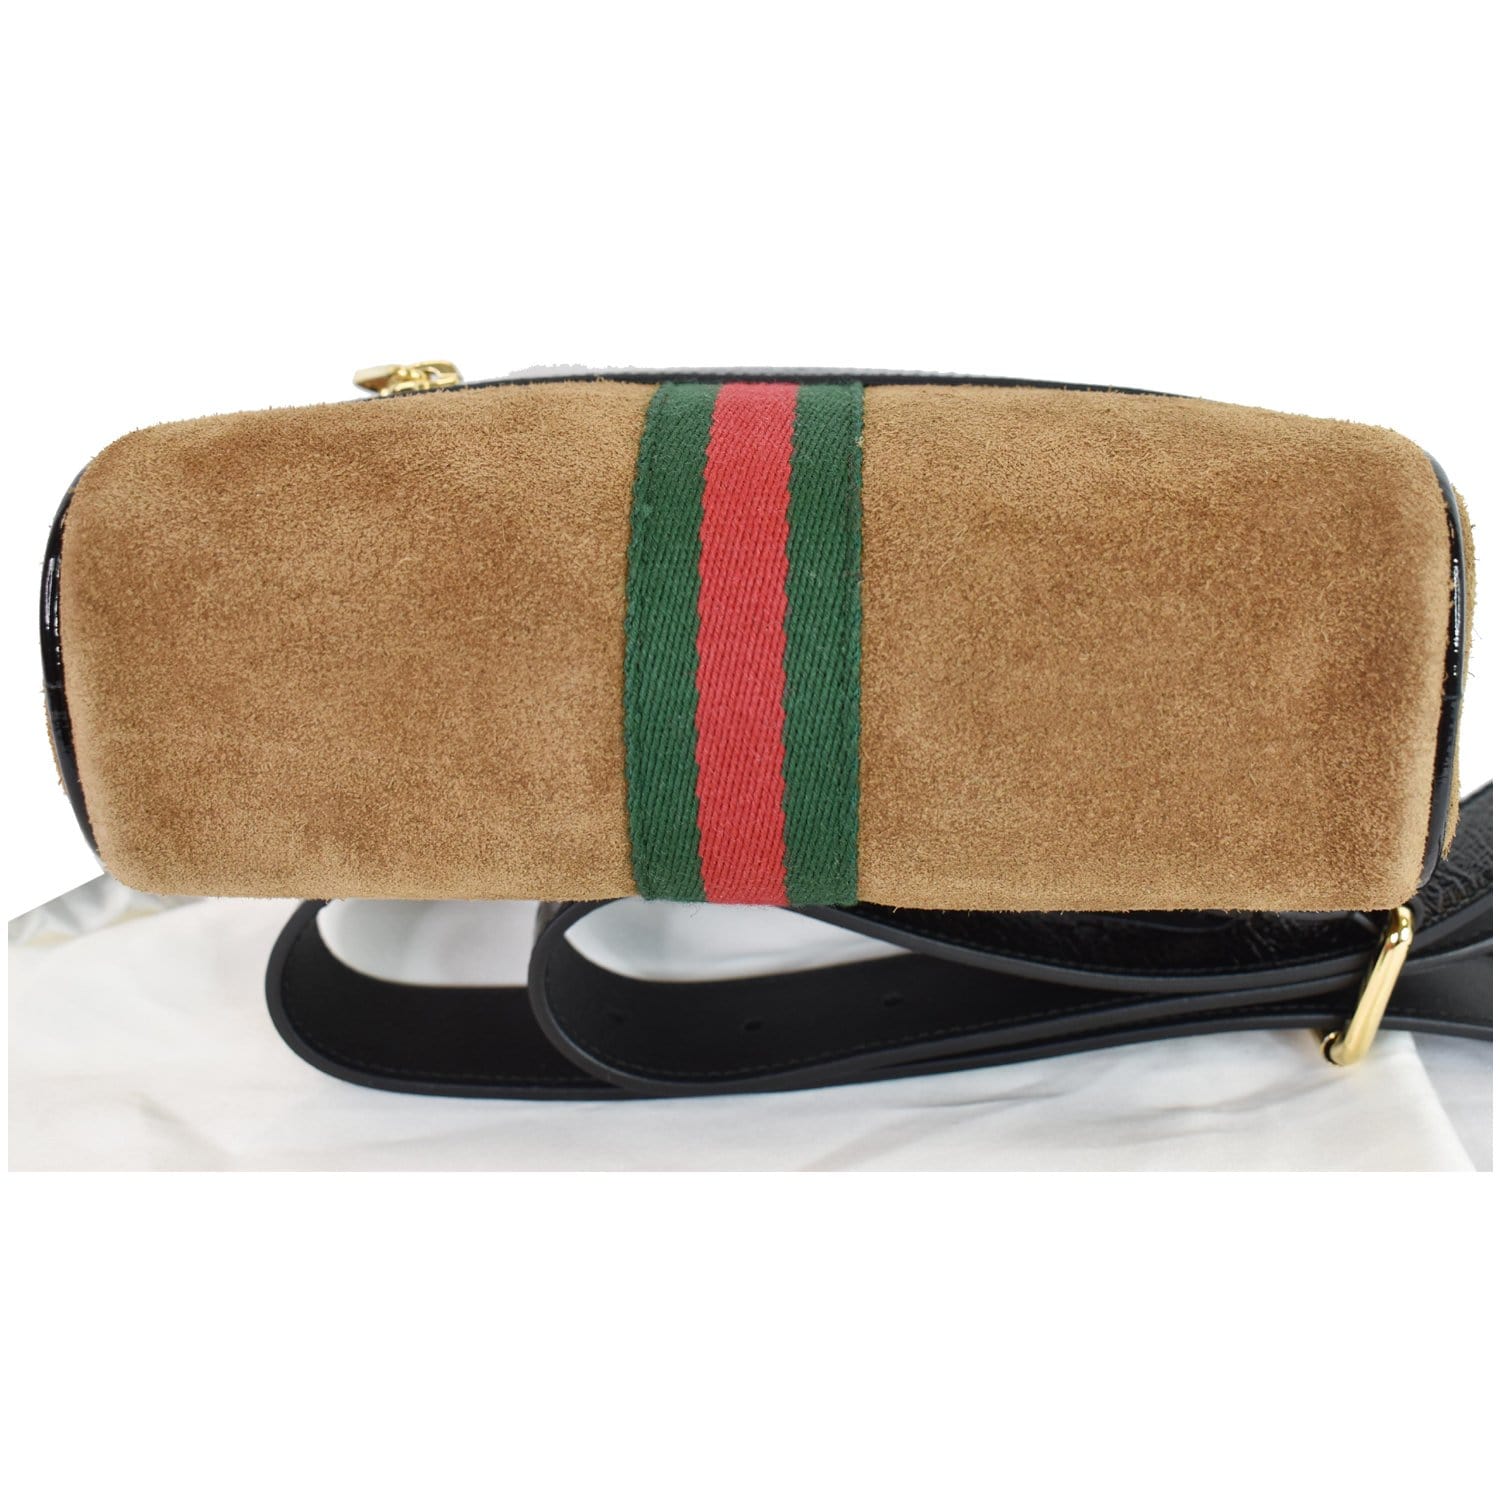 Gucci Ophidia Brown Suede Web Belt Bag w/ Leather Trim Size 85 | Brand New